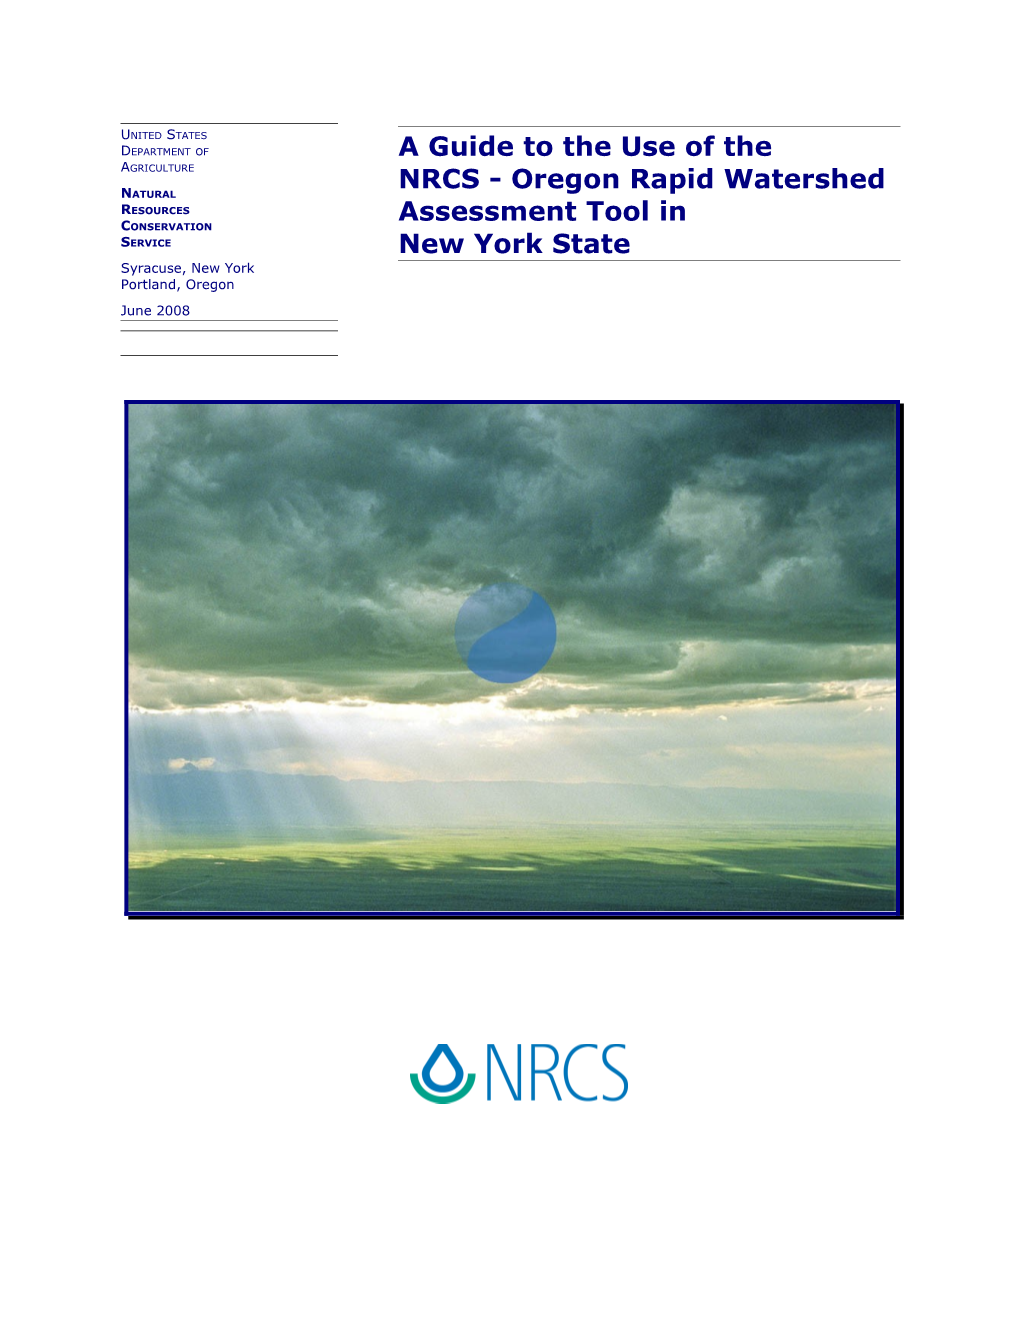 A Guide to the Use of the Oregon Rapid Watershed Assessment Matrix Tool for New York State